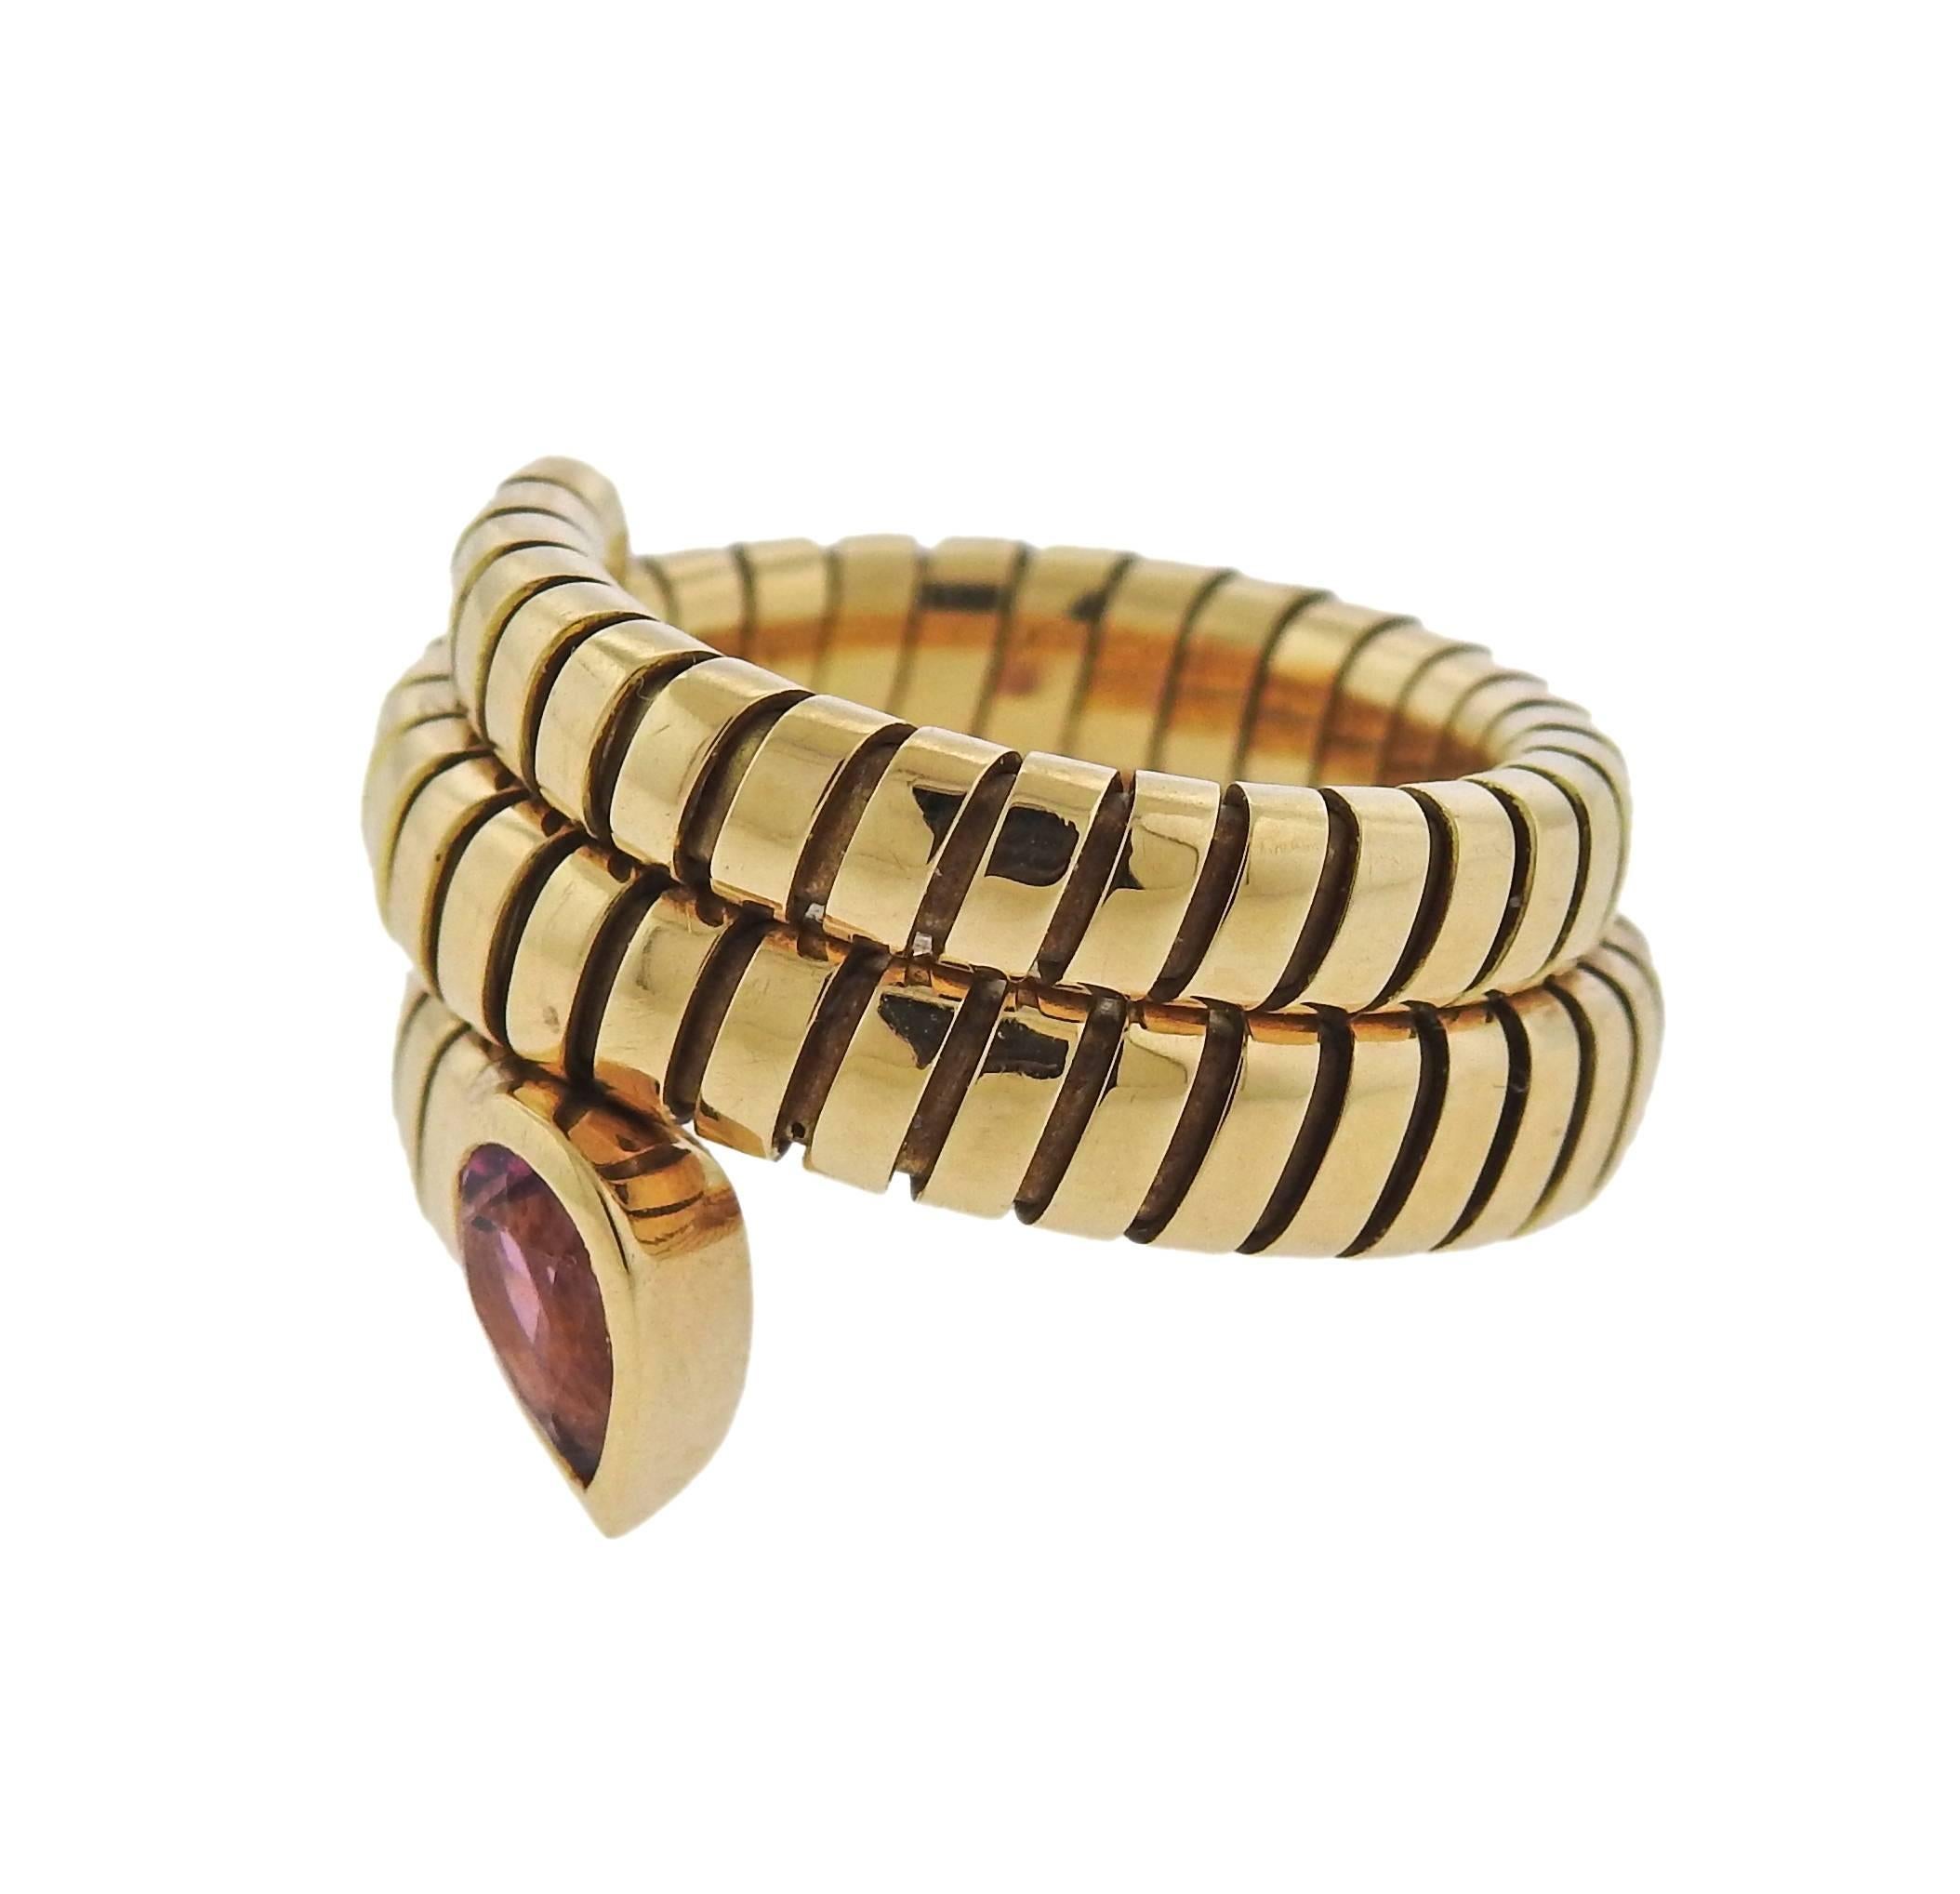 An 18k gold wrap ring, crafted by Bulgari for Tubogas collection, decorated with pink tourmaline. Ring size 7 (slightly flexible)  ring top is 18mm wide, weighs 15 grams. Marked: Bvlgari, 750, Italian mark 